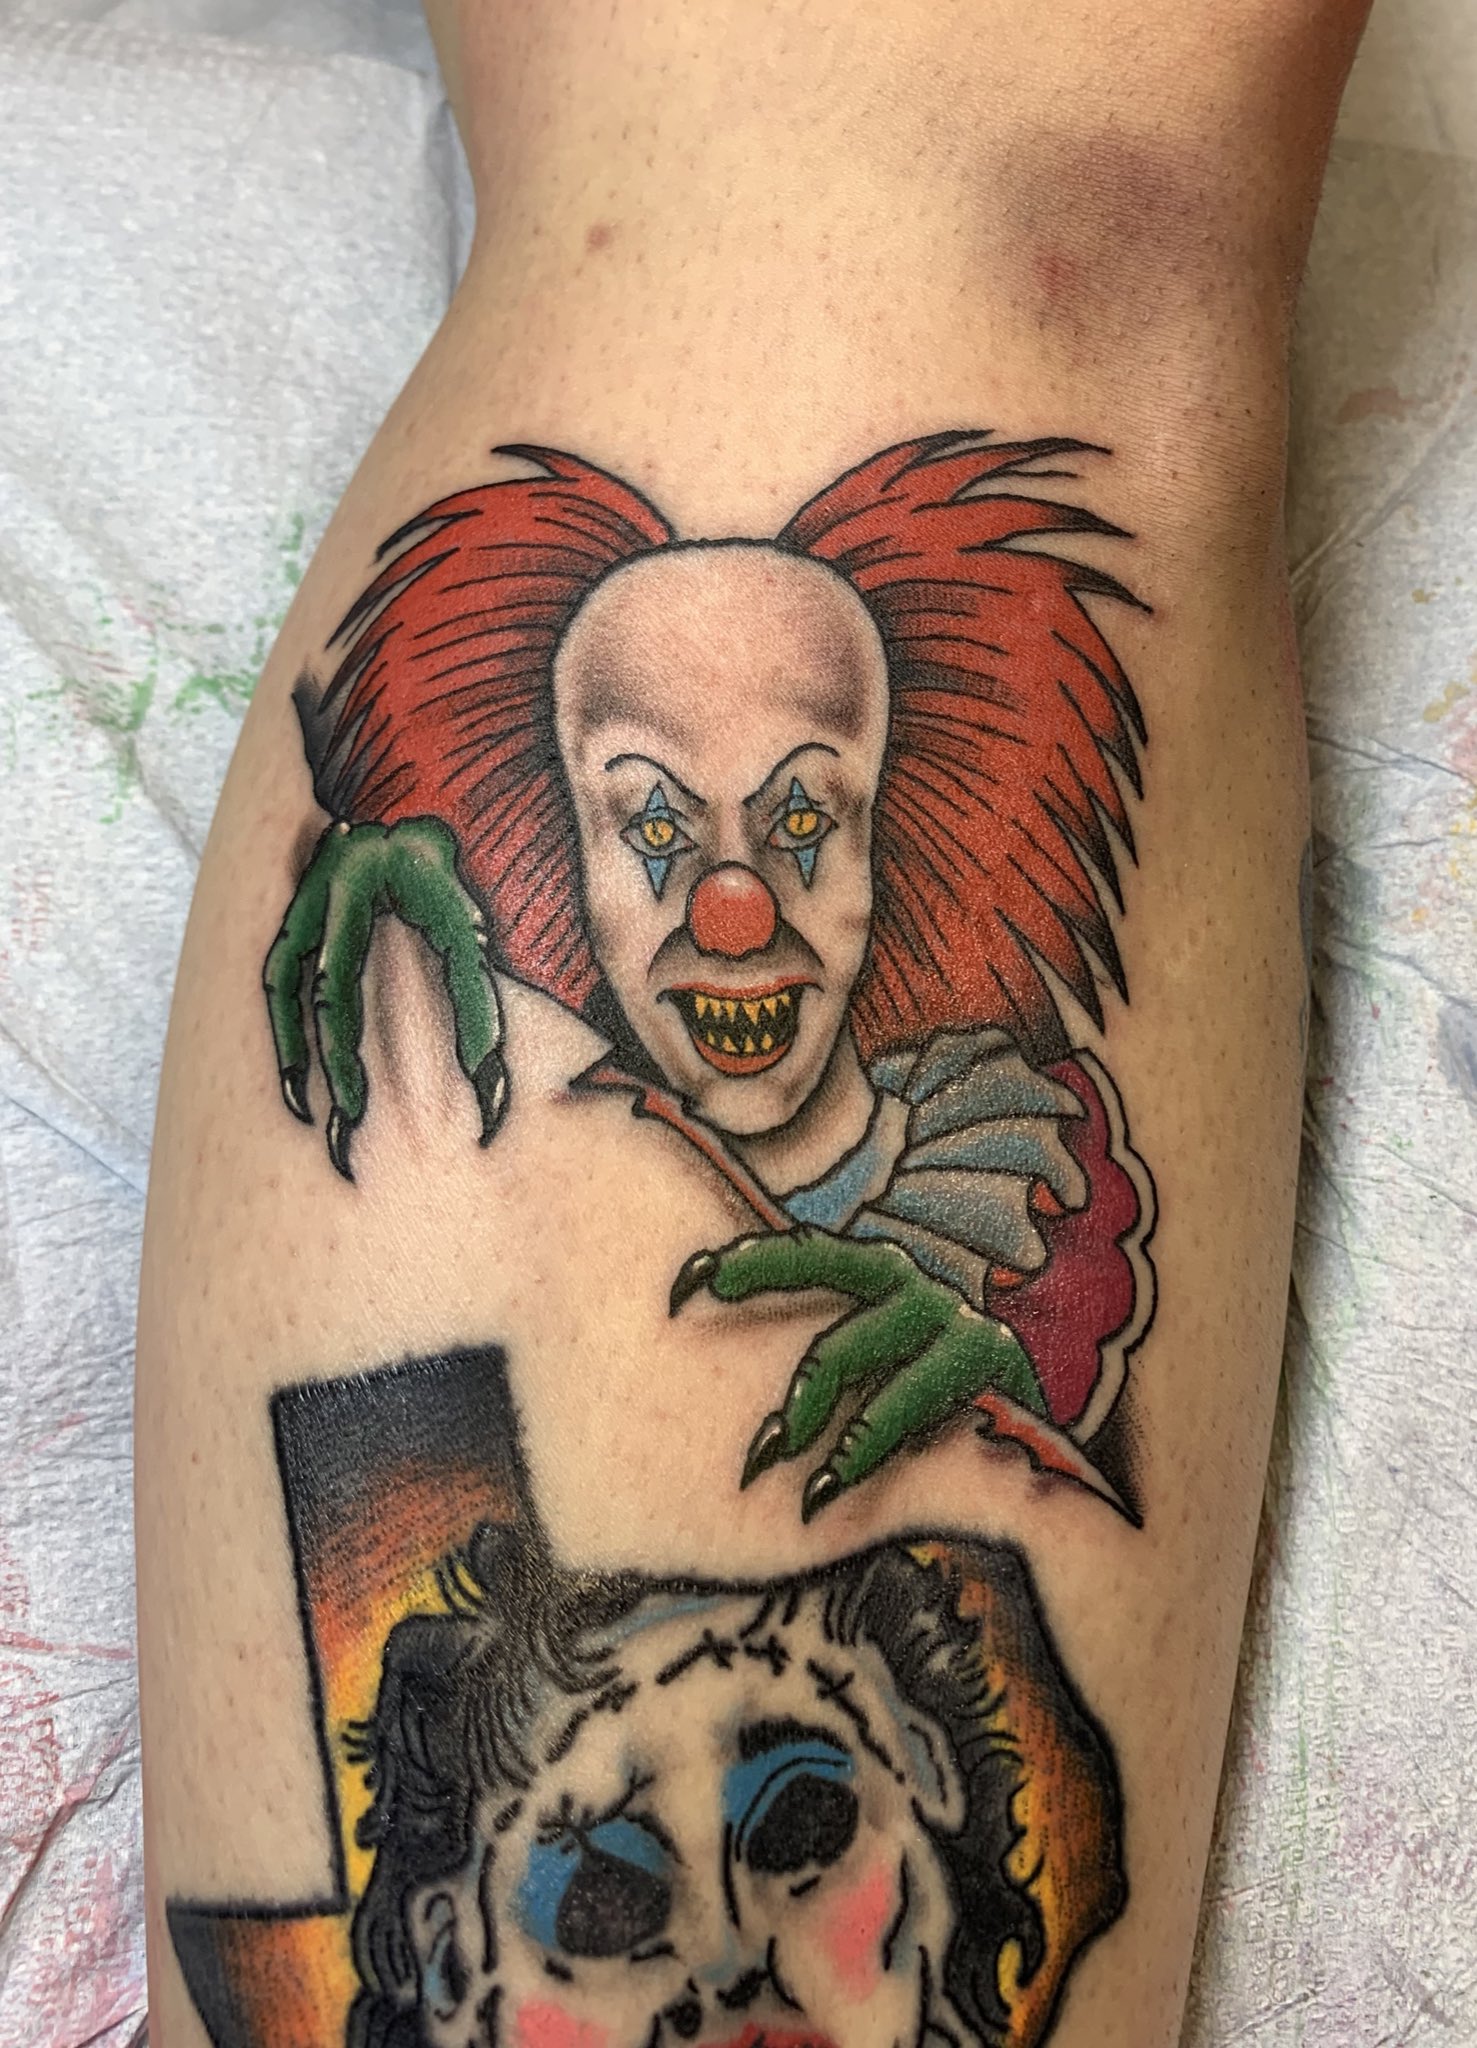 Pennywise  on Twitter  Tattuesday  Check out this killer  traditional style Pennywise  Would you ever get a Pennywise tattoo  httpstcoJdMUCQw9Fo  Twitter